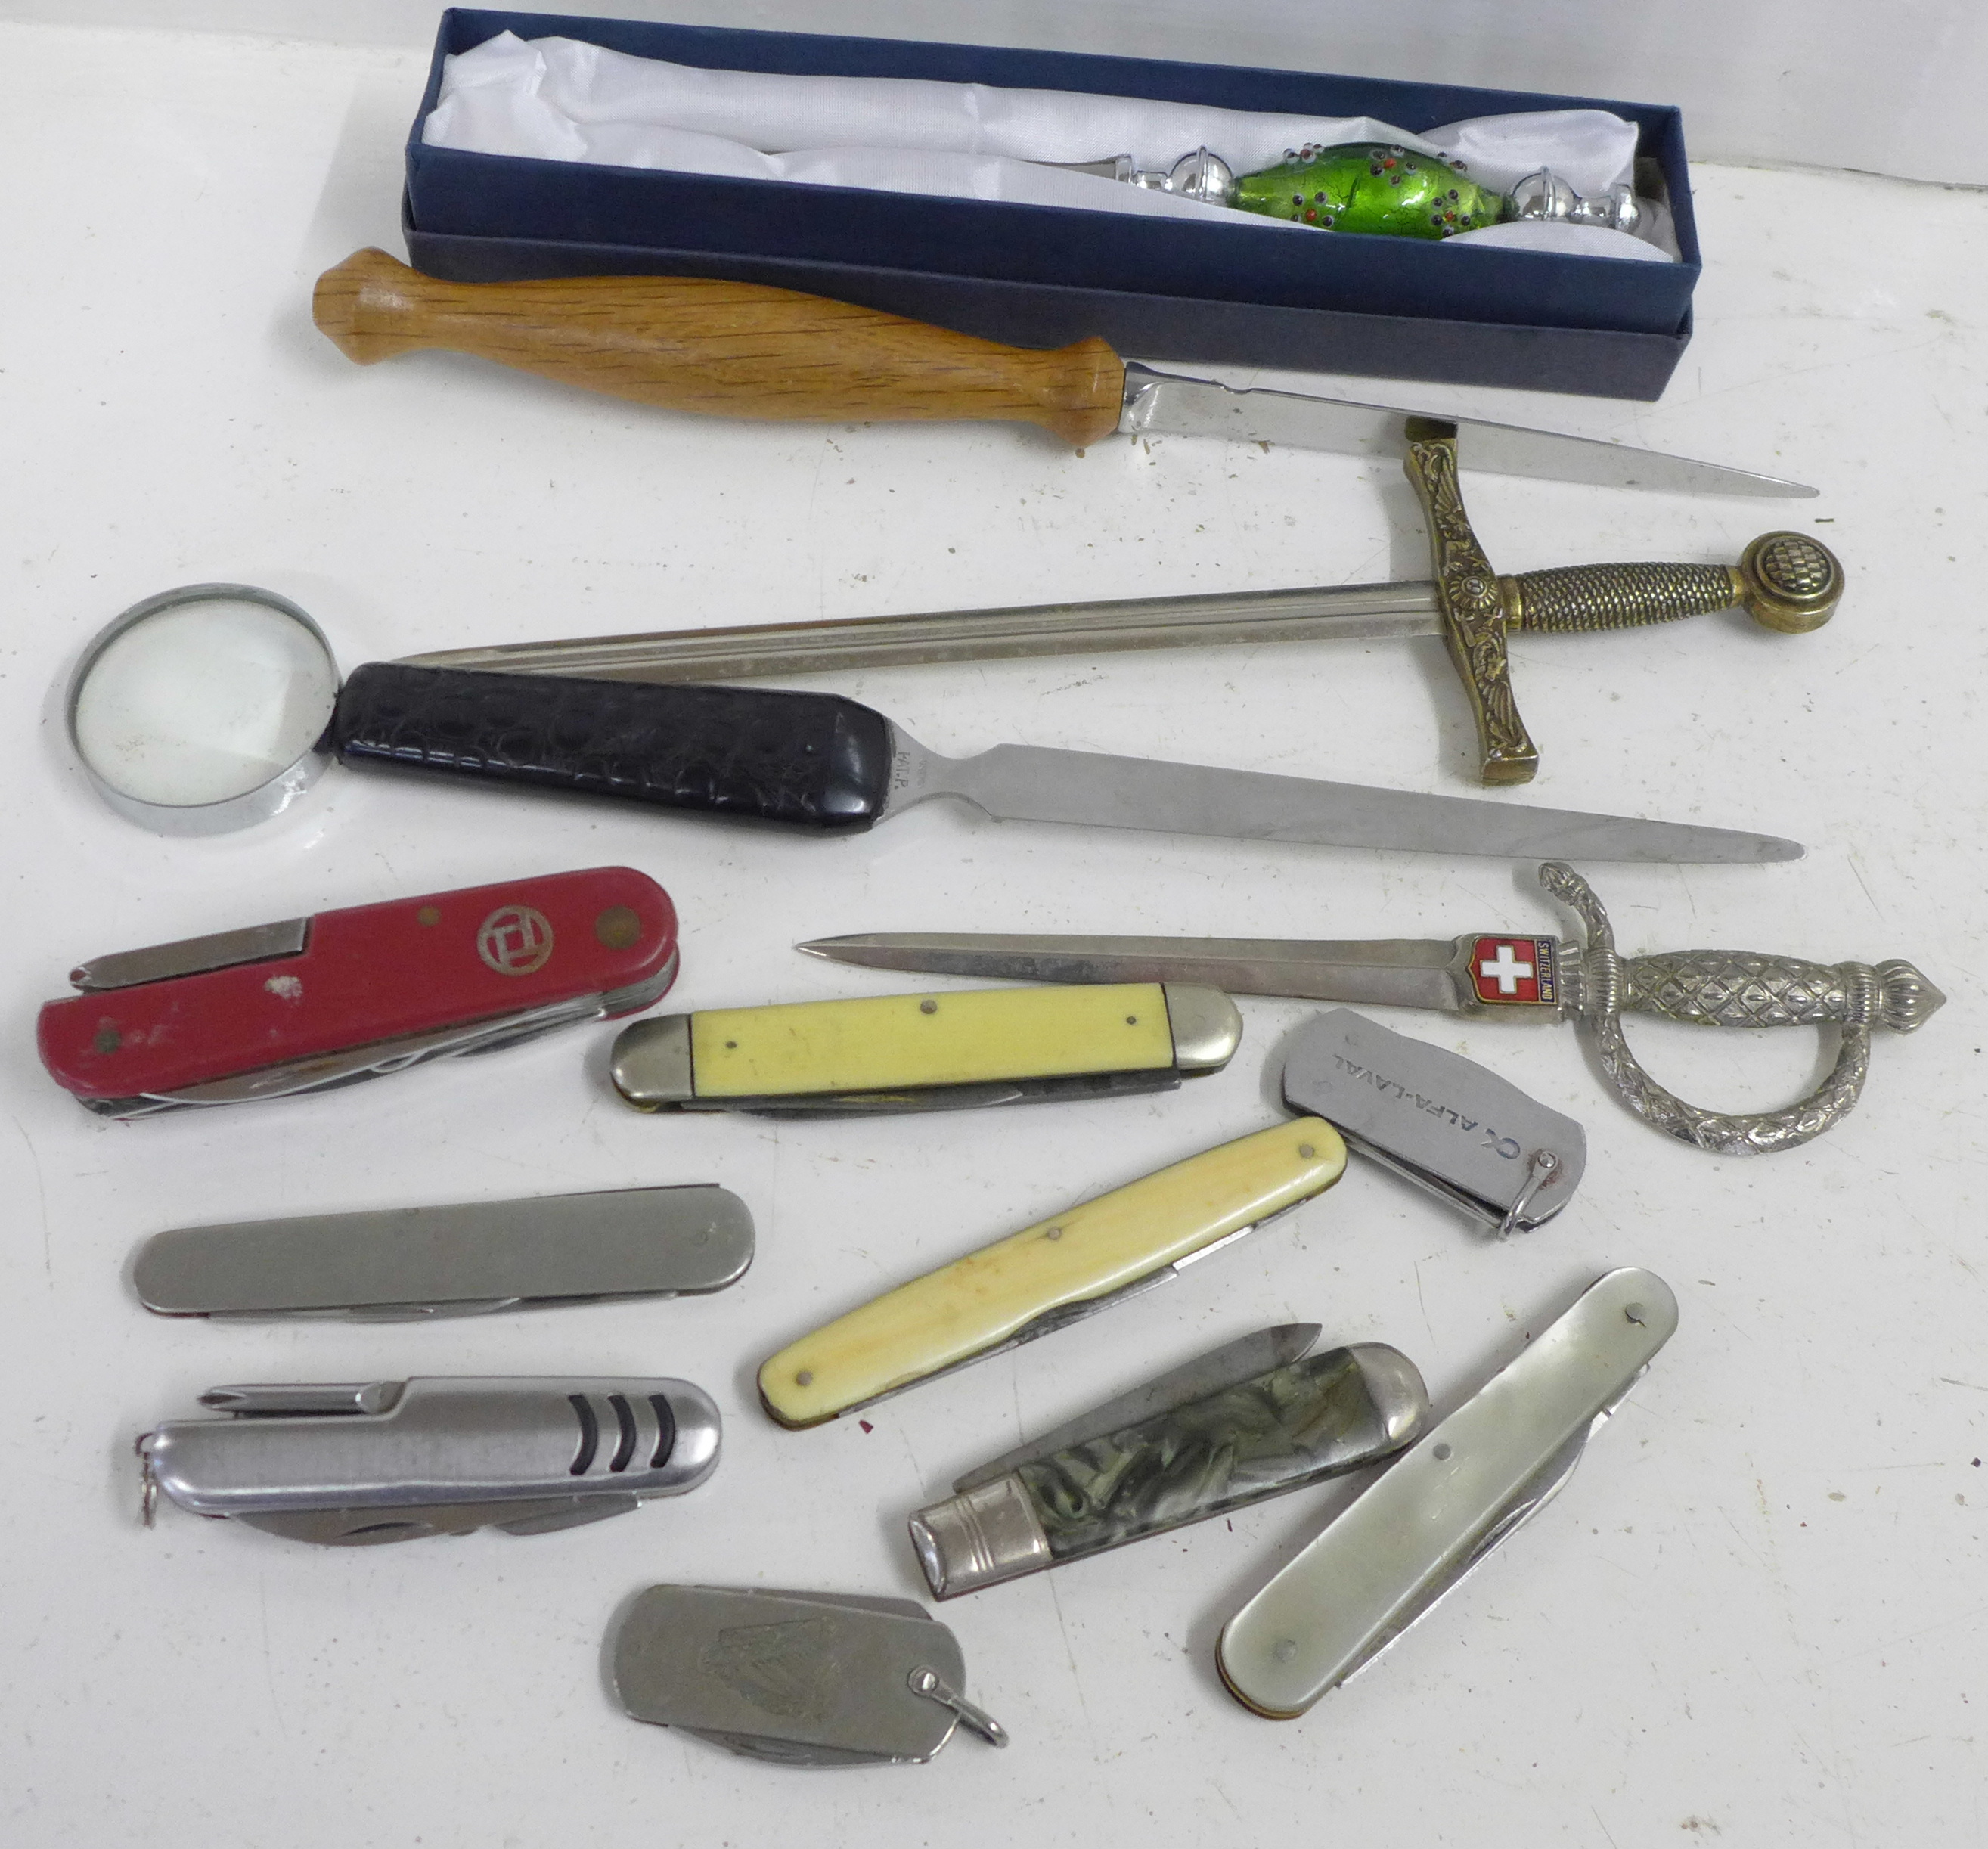 Pocket knives and letter openers